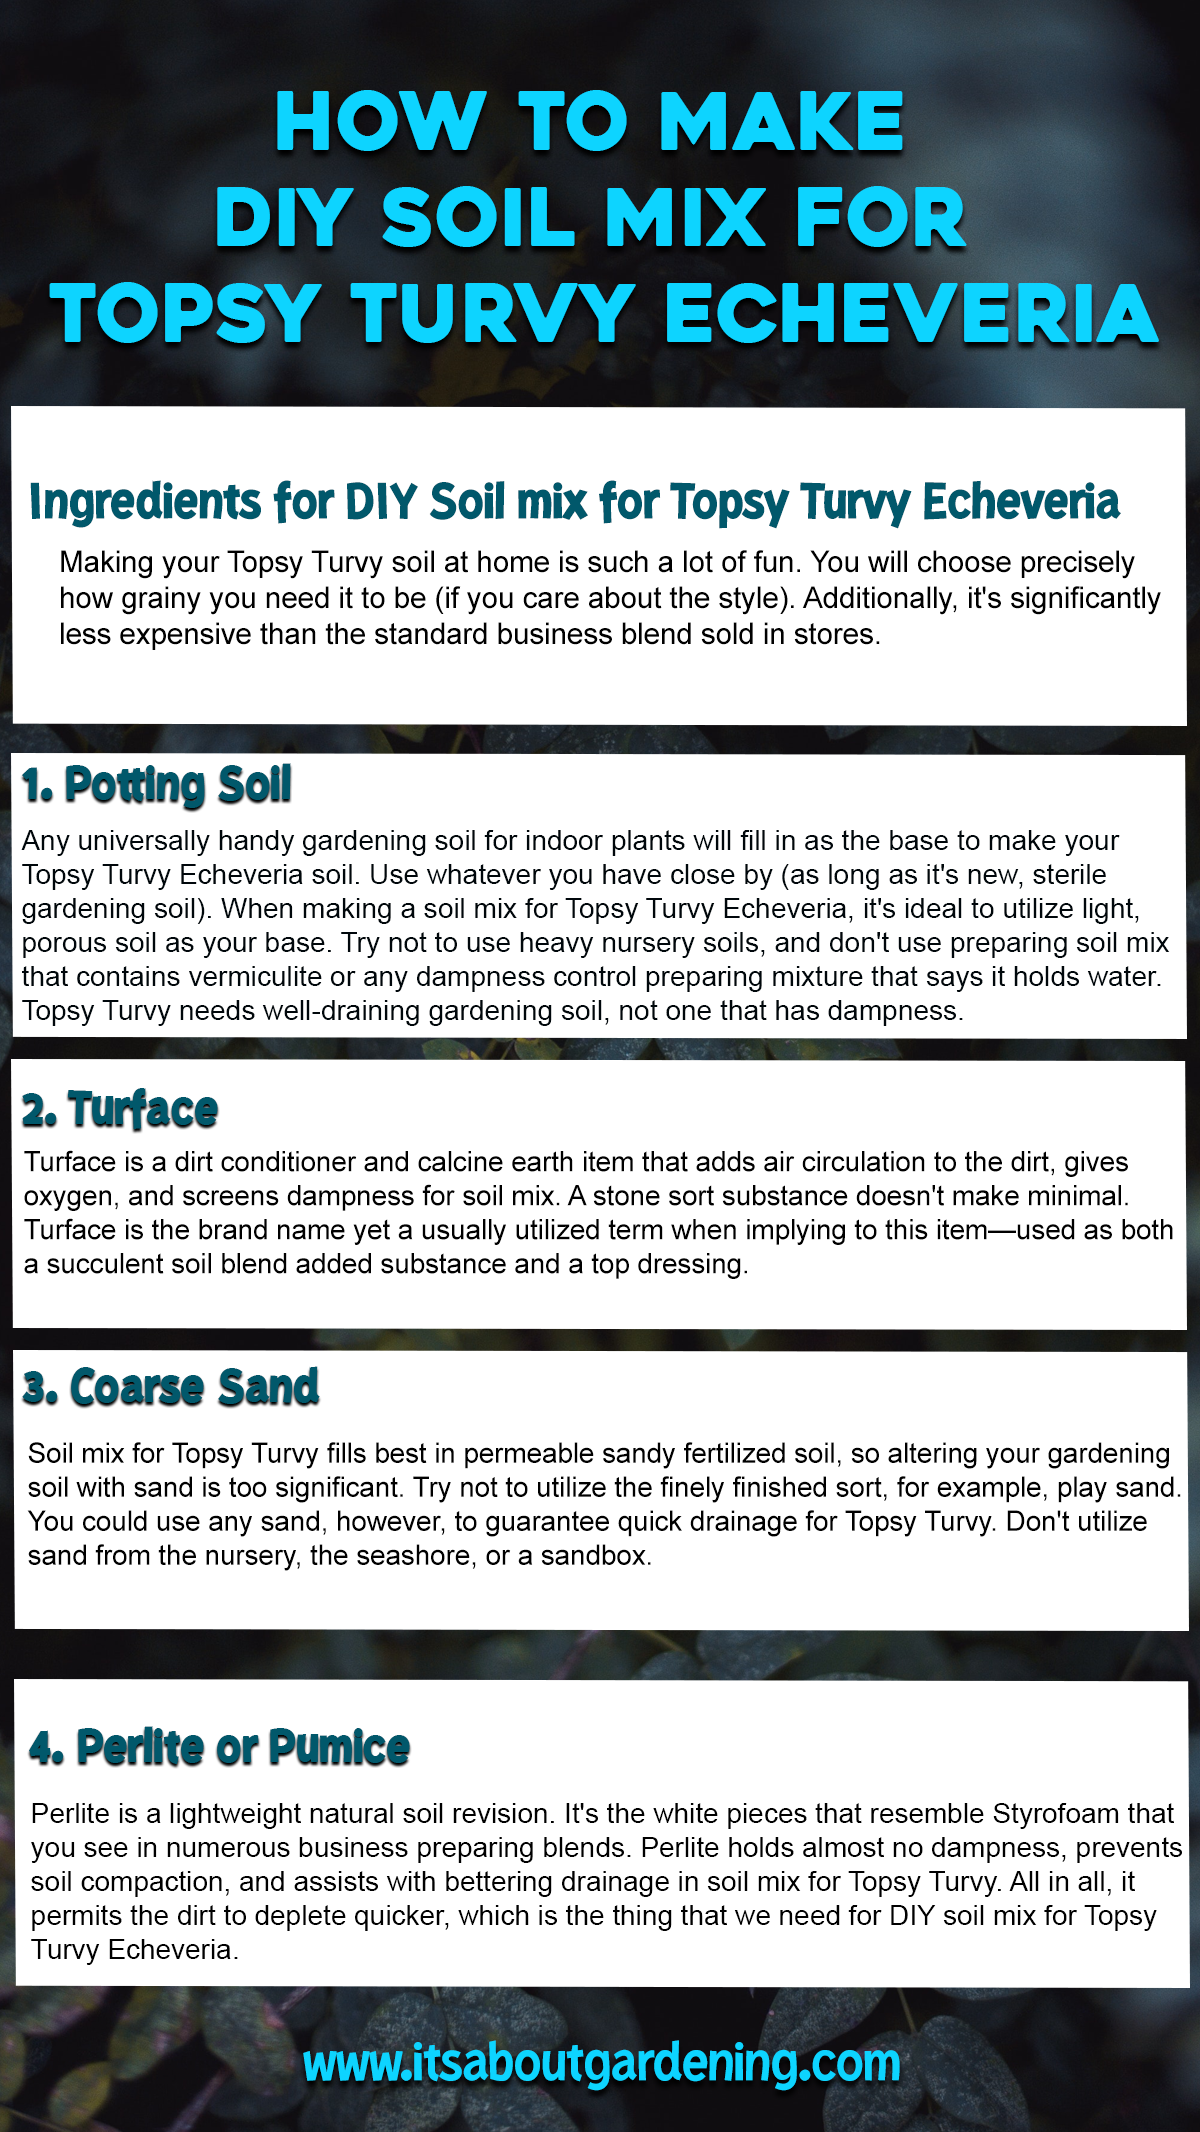 How to Make DIY Soil Mix for Topsy Turvy Echeveria Infographic